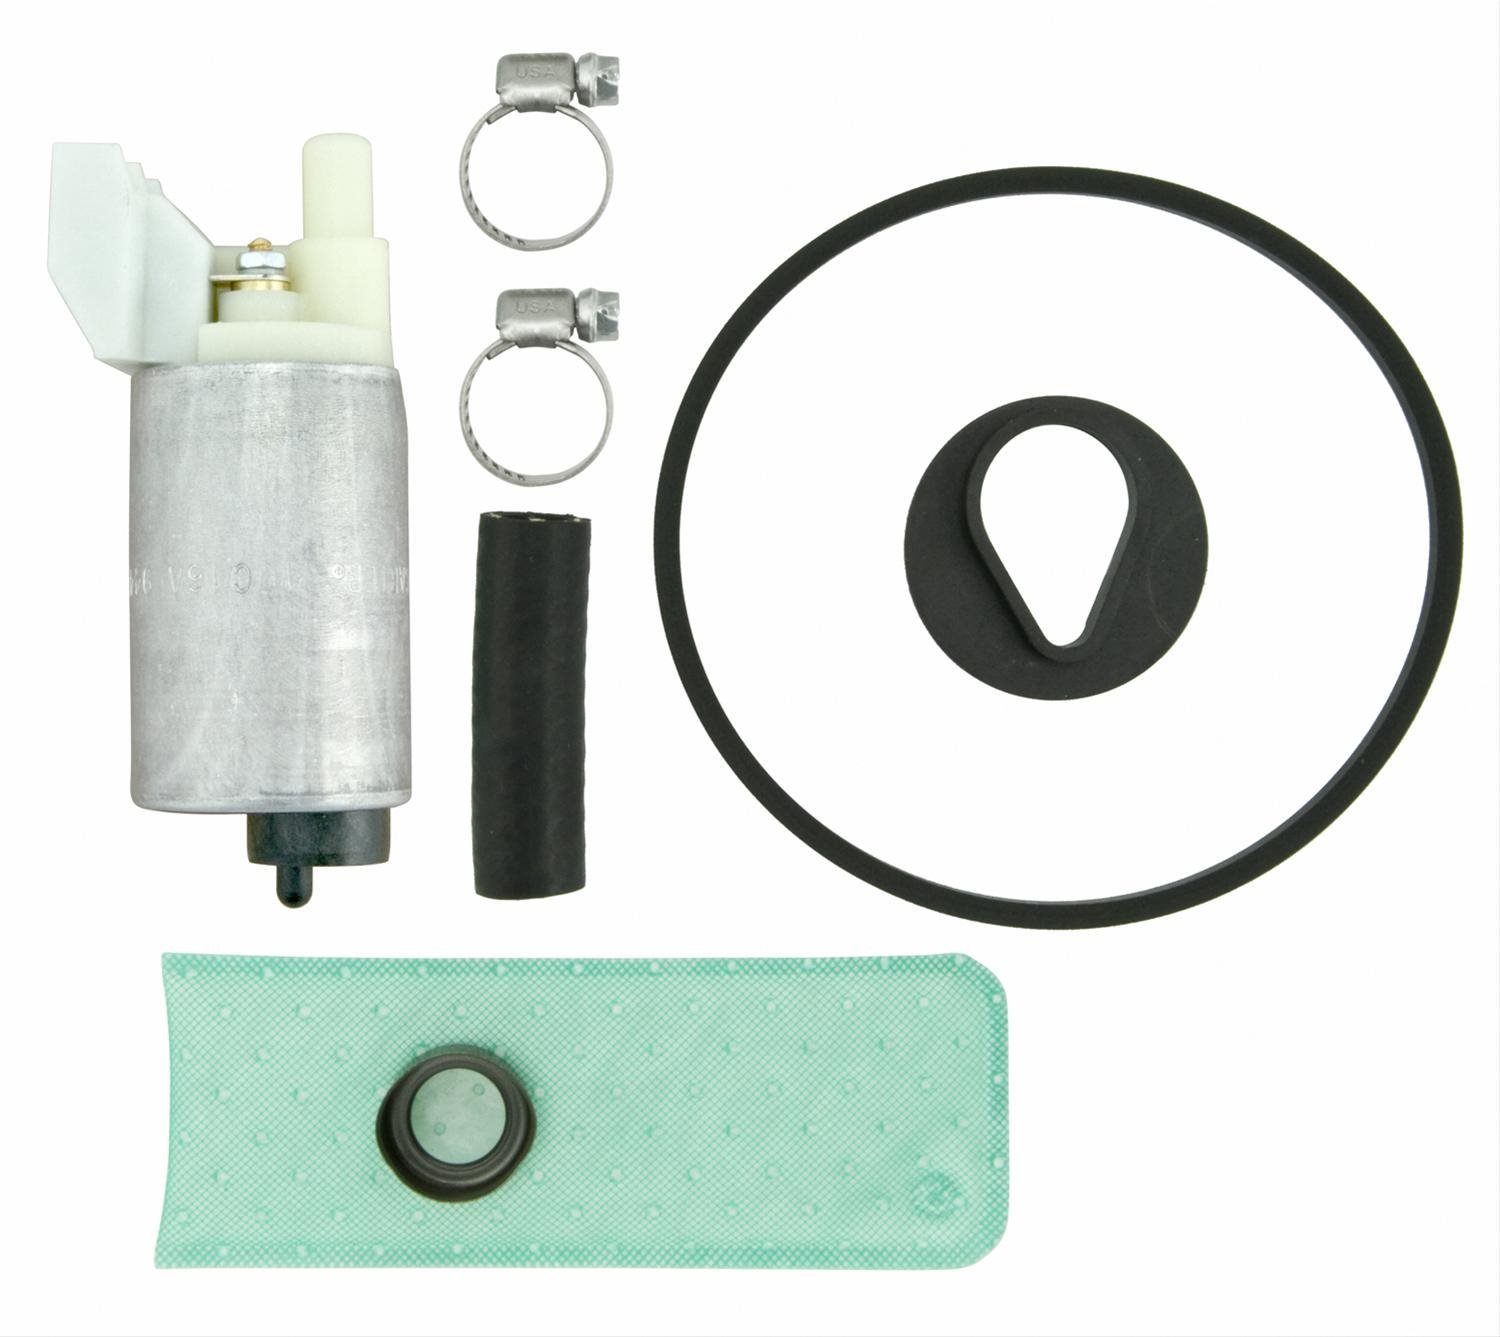 EFI In-Tank Electric Fuel Pump And Strainer Set for 1958-1988 Ford Ranger/1986-1988 Ford Bronco